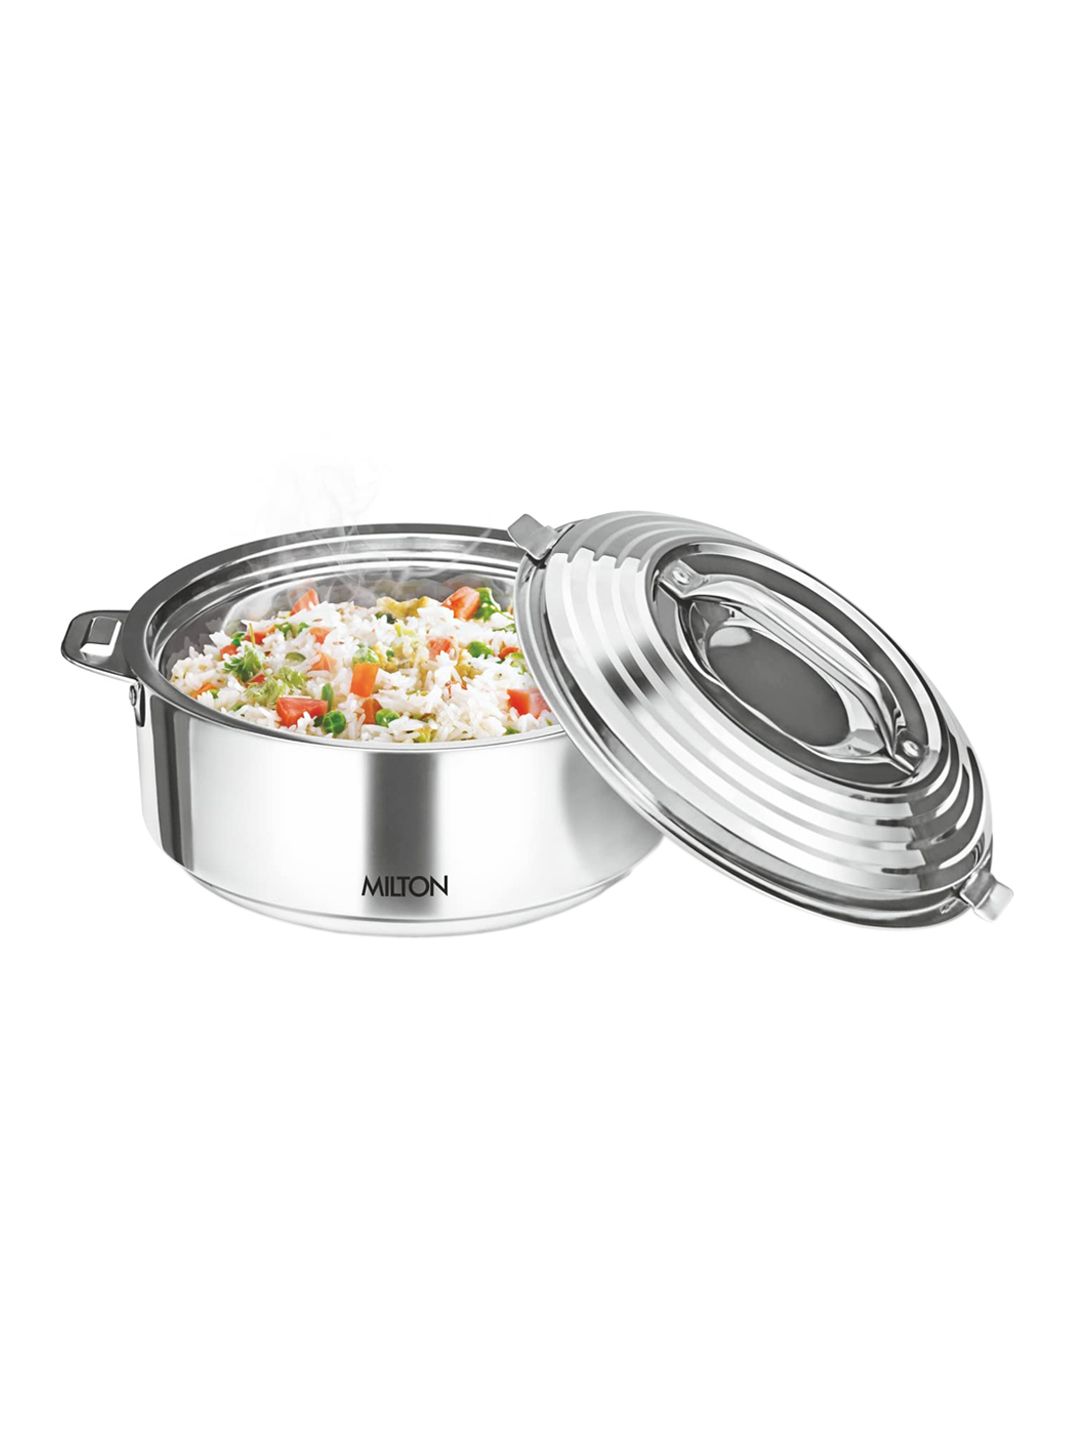 Milton Silver Stainless Steel Galaxia Casserole-1000 ml Price in India